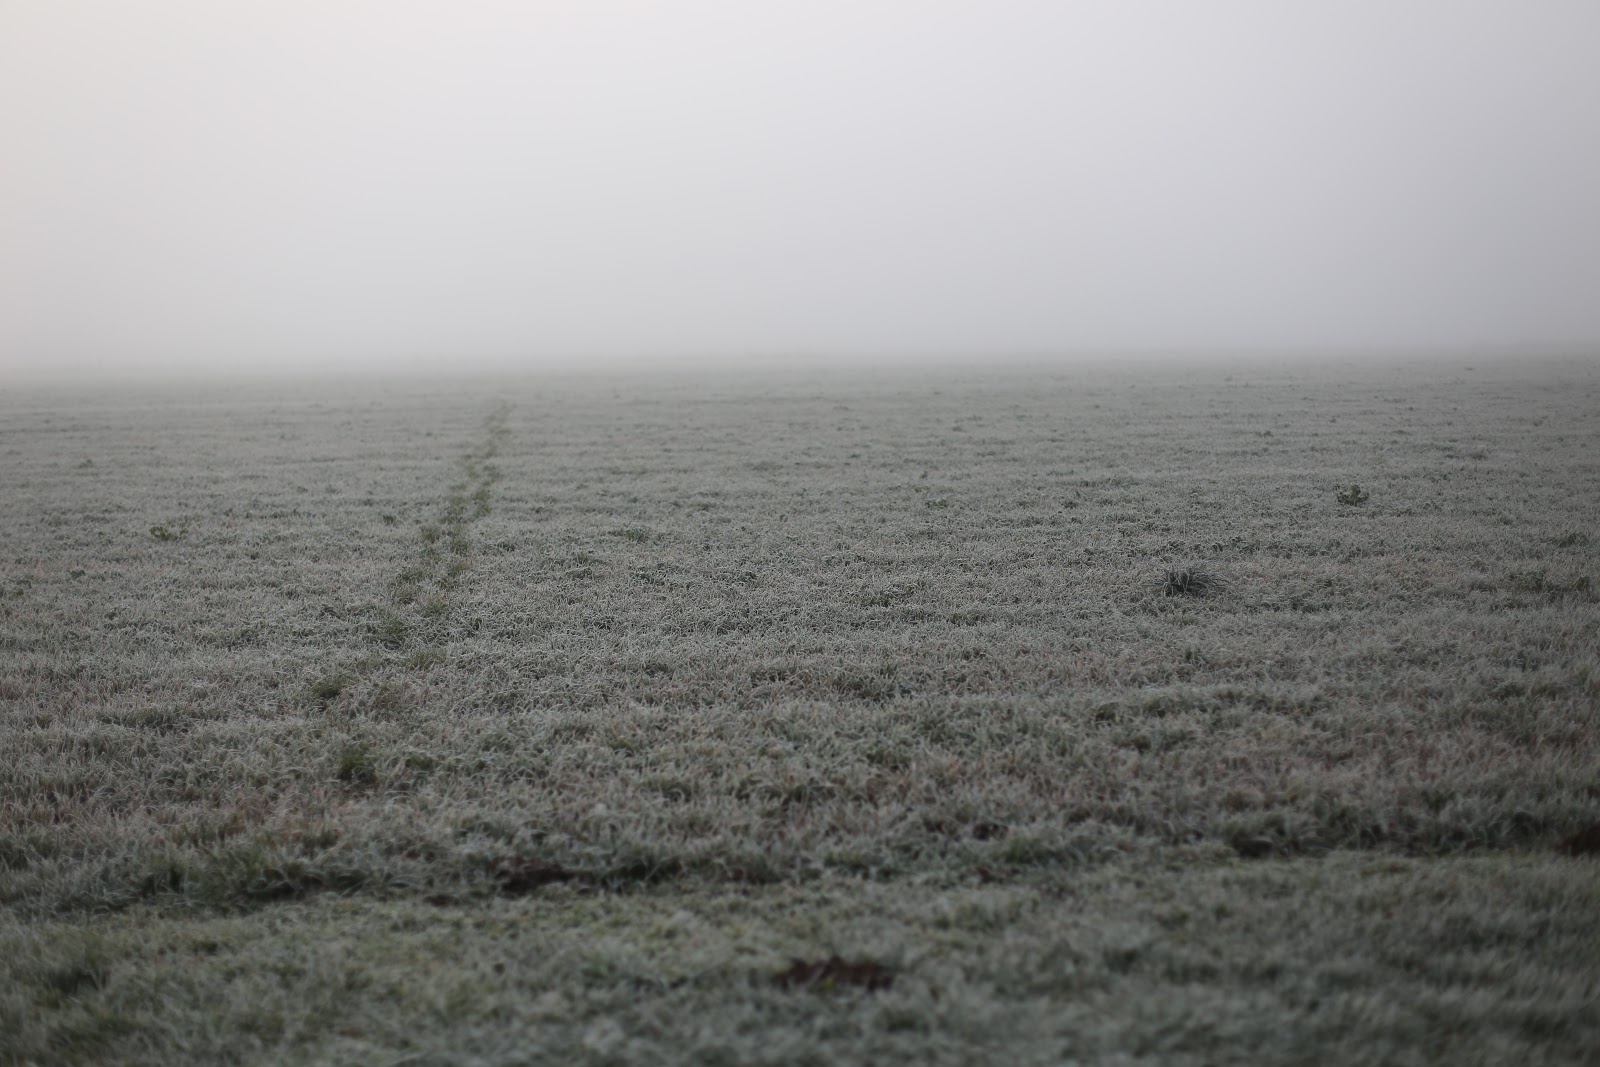 A frost covered field